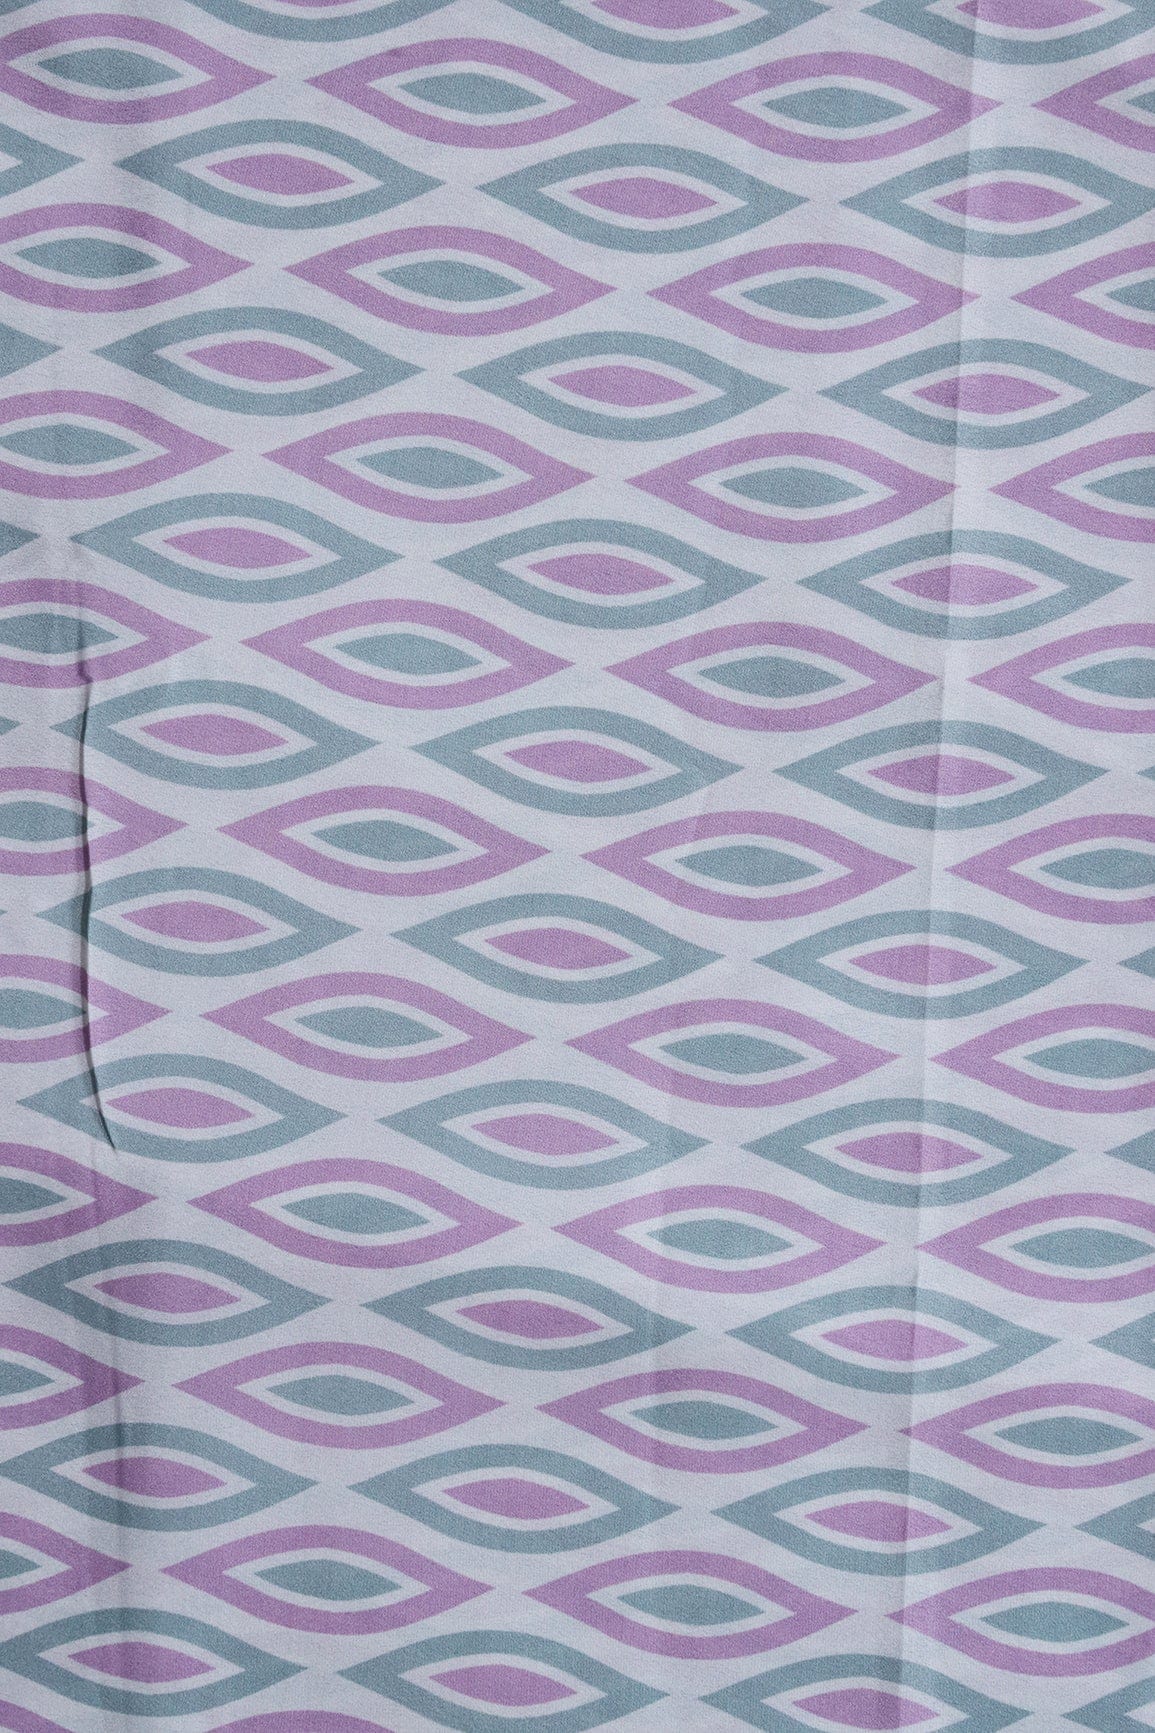 doeraa Prints Lavender And Pastel Green Geometric Pattern Digital Print On French Crepe Fabric